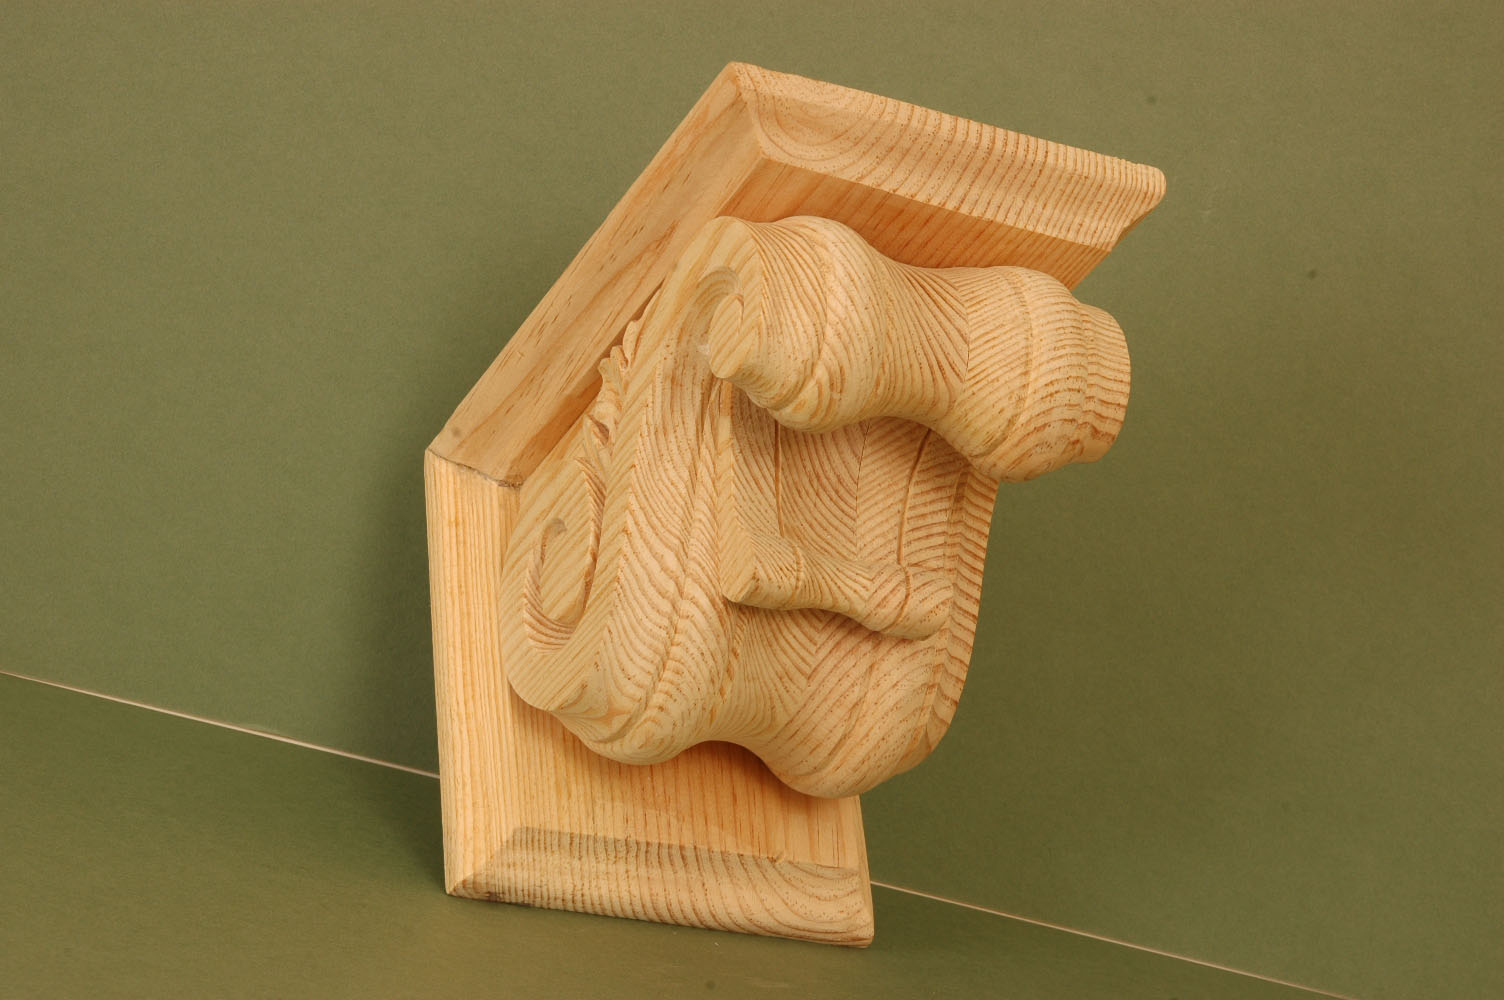 Soffit corbel PN653 from buycarvings.co.uk